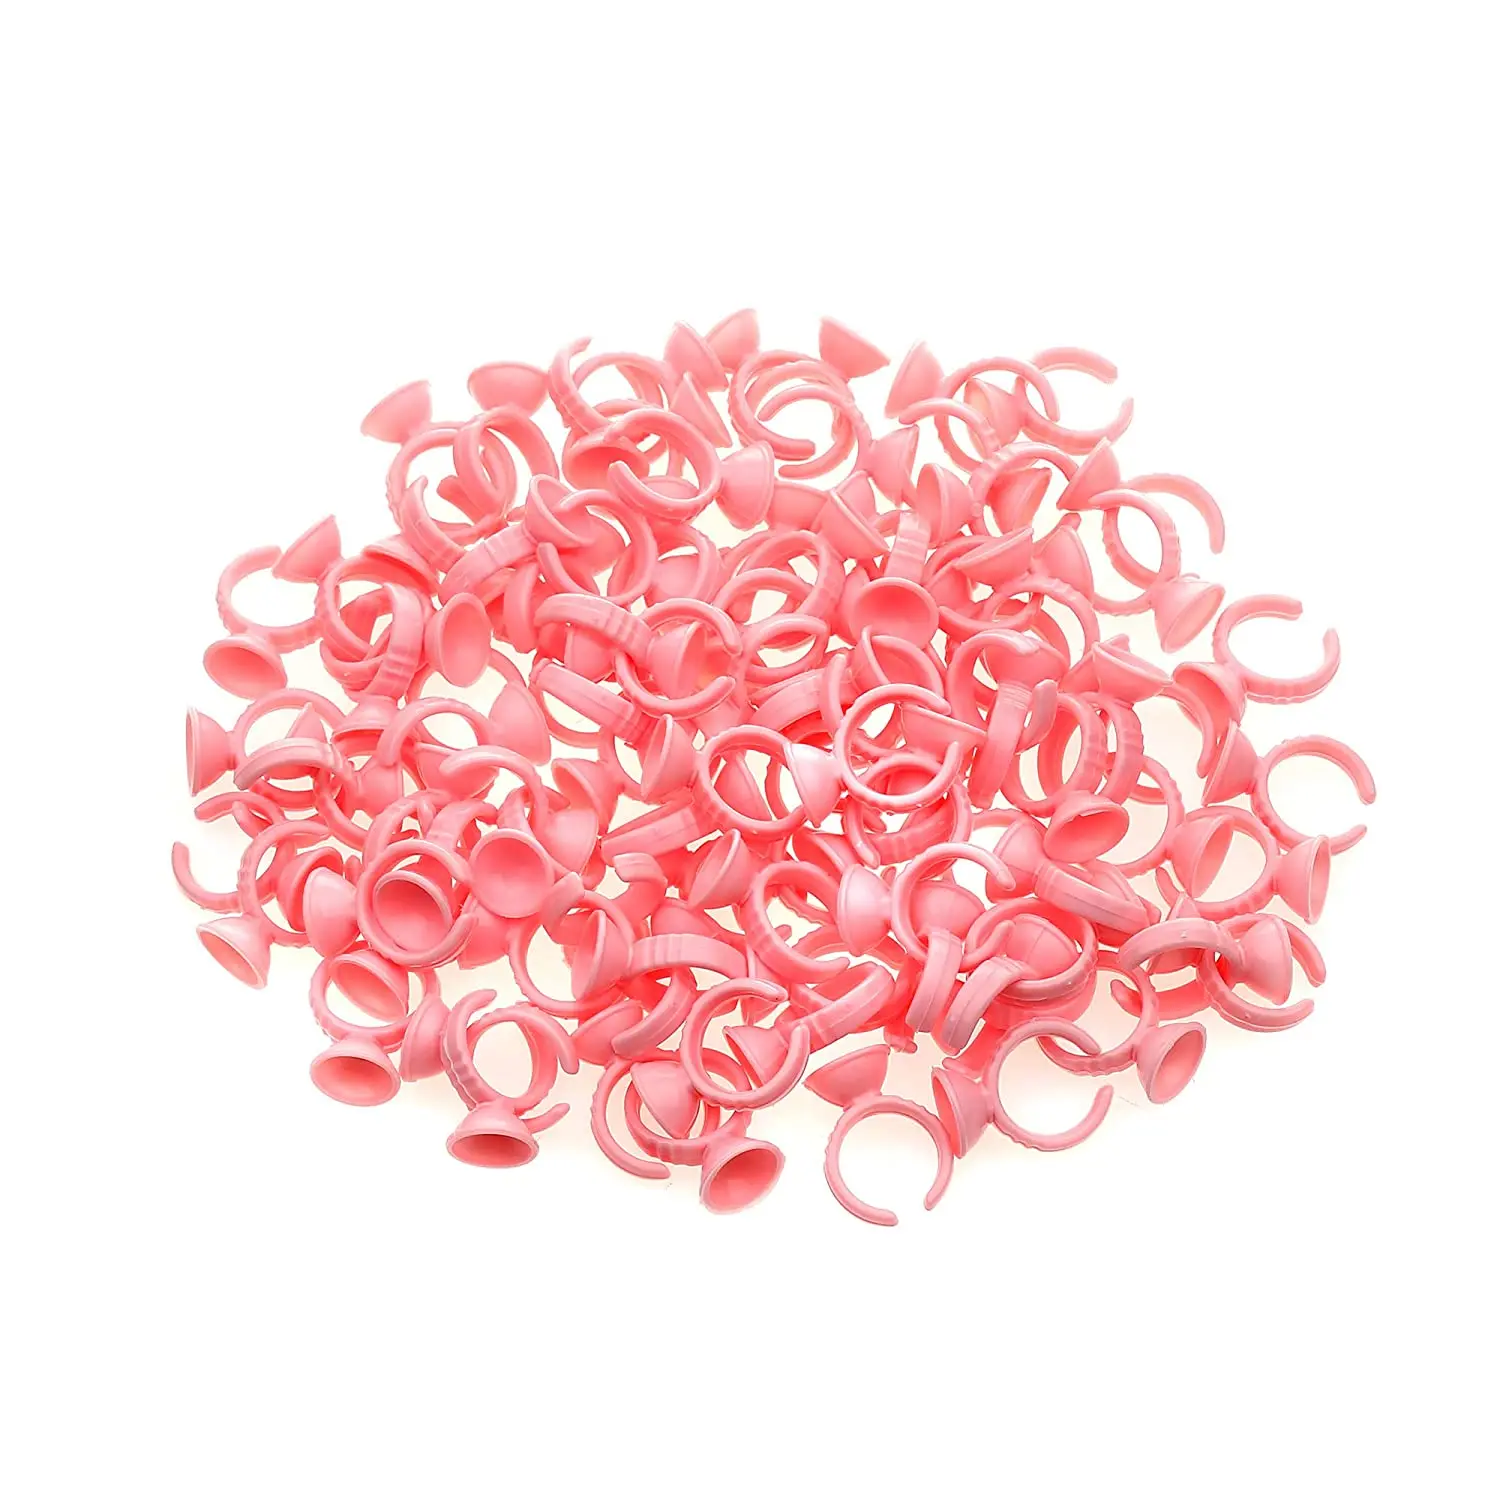 

100pcs/bag Disposable Pink Plastic Tattoo Pigment Ring Ink Cups Holder Tools Eyelash Extension Glue Rings Wholesale Cheap Price